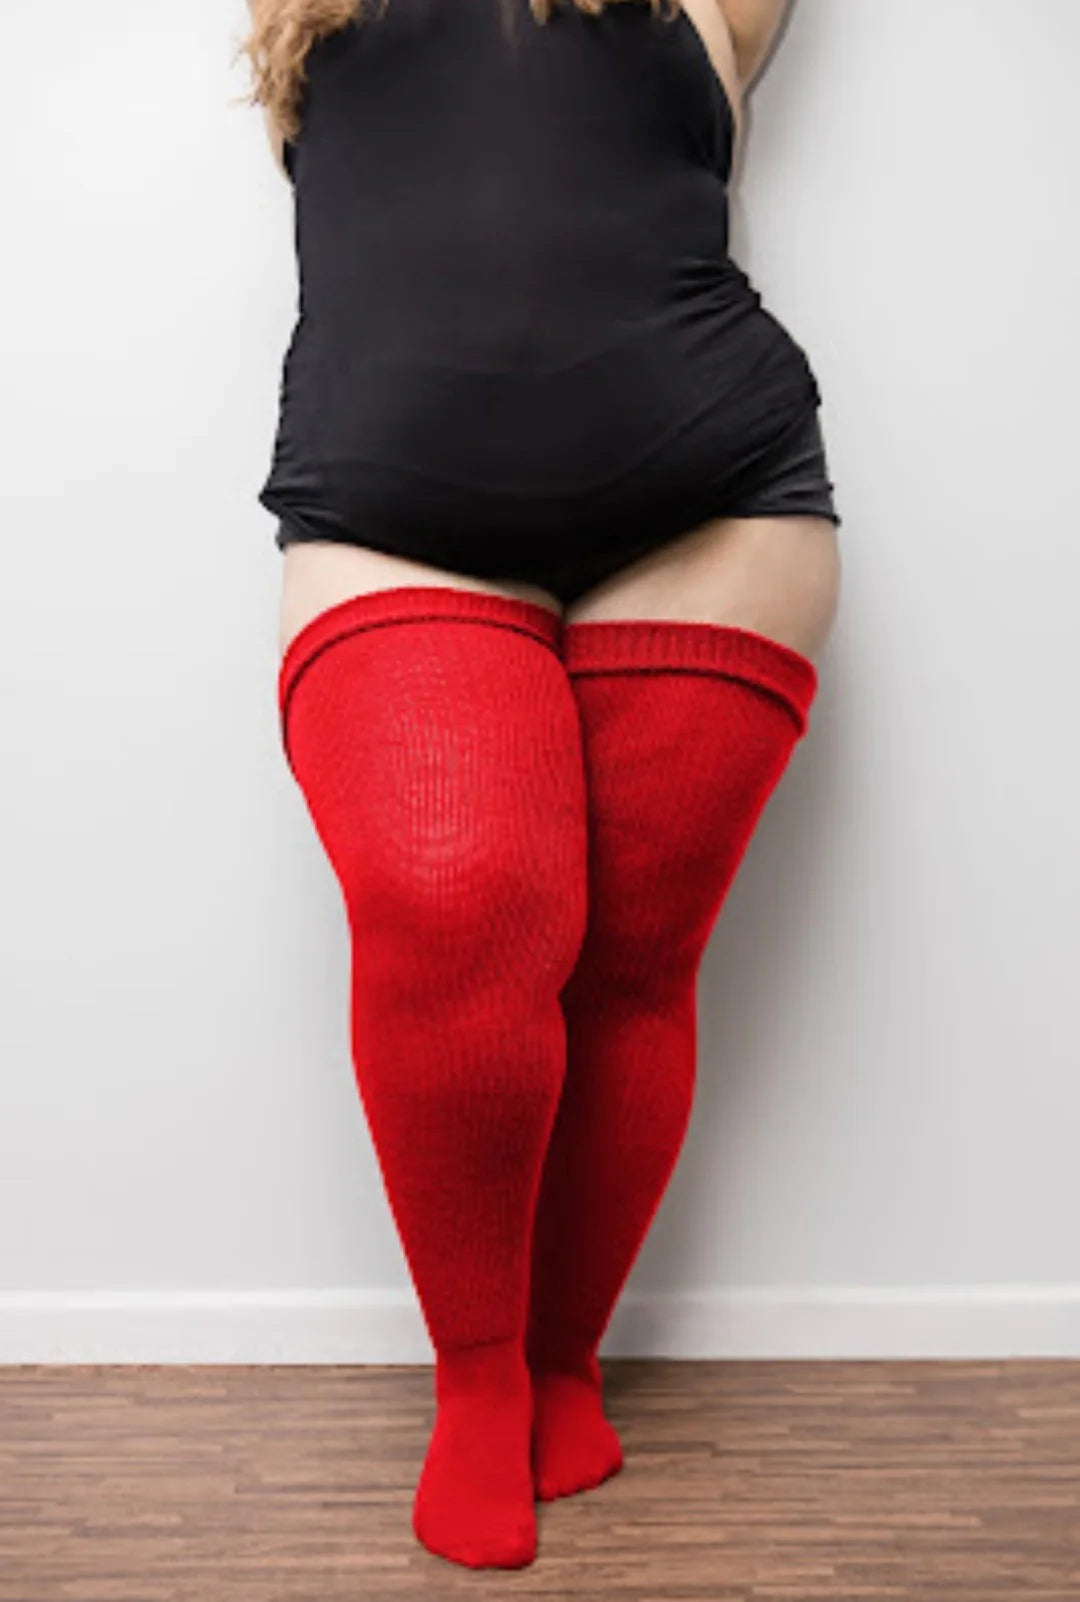 Plus Size Thigh High Socks in Red Delicious